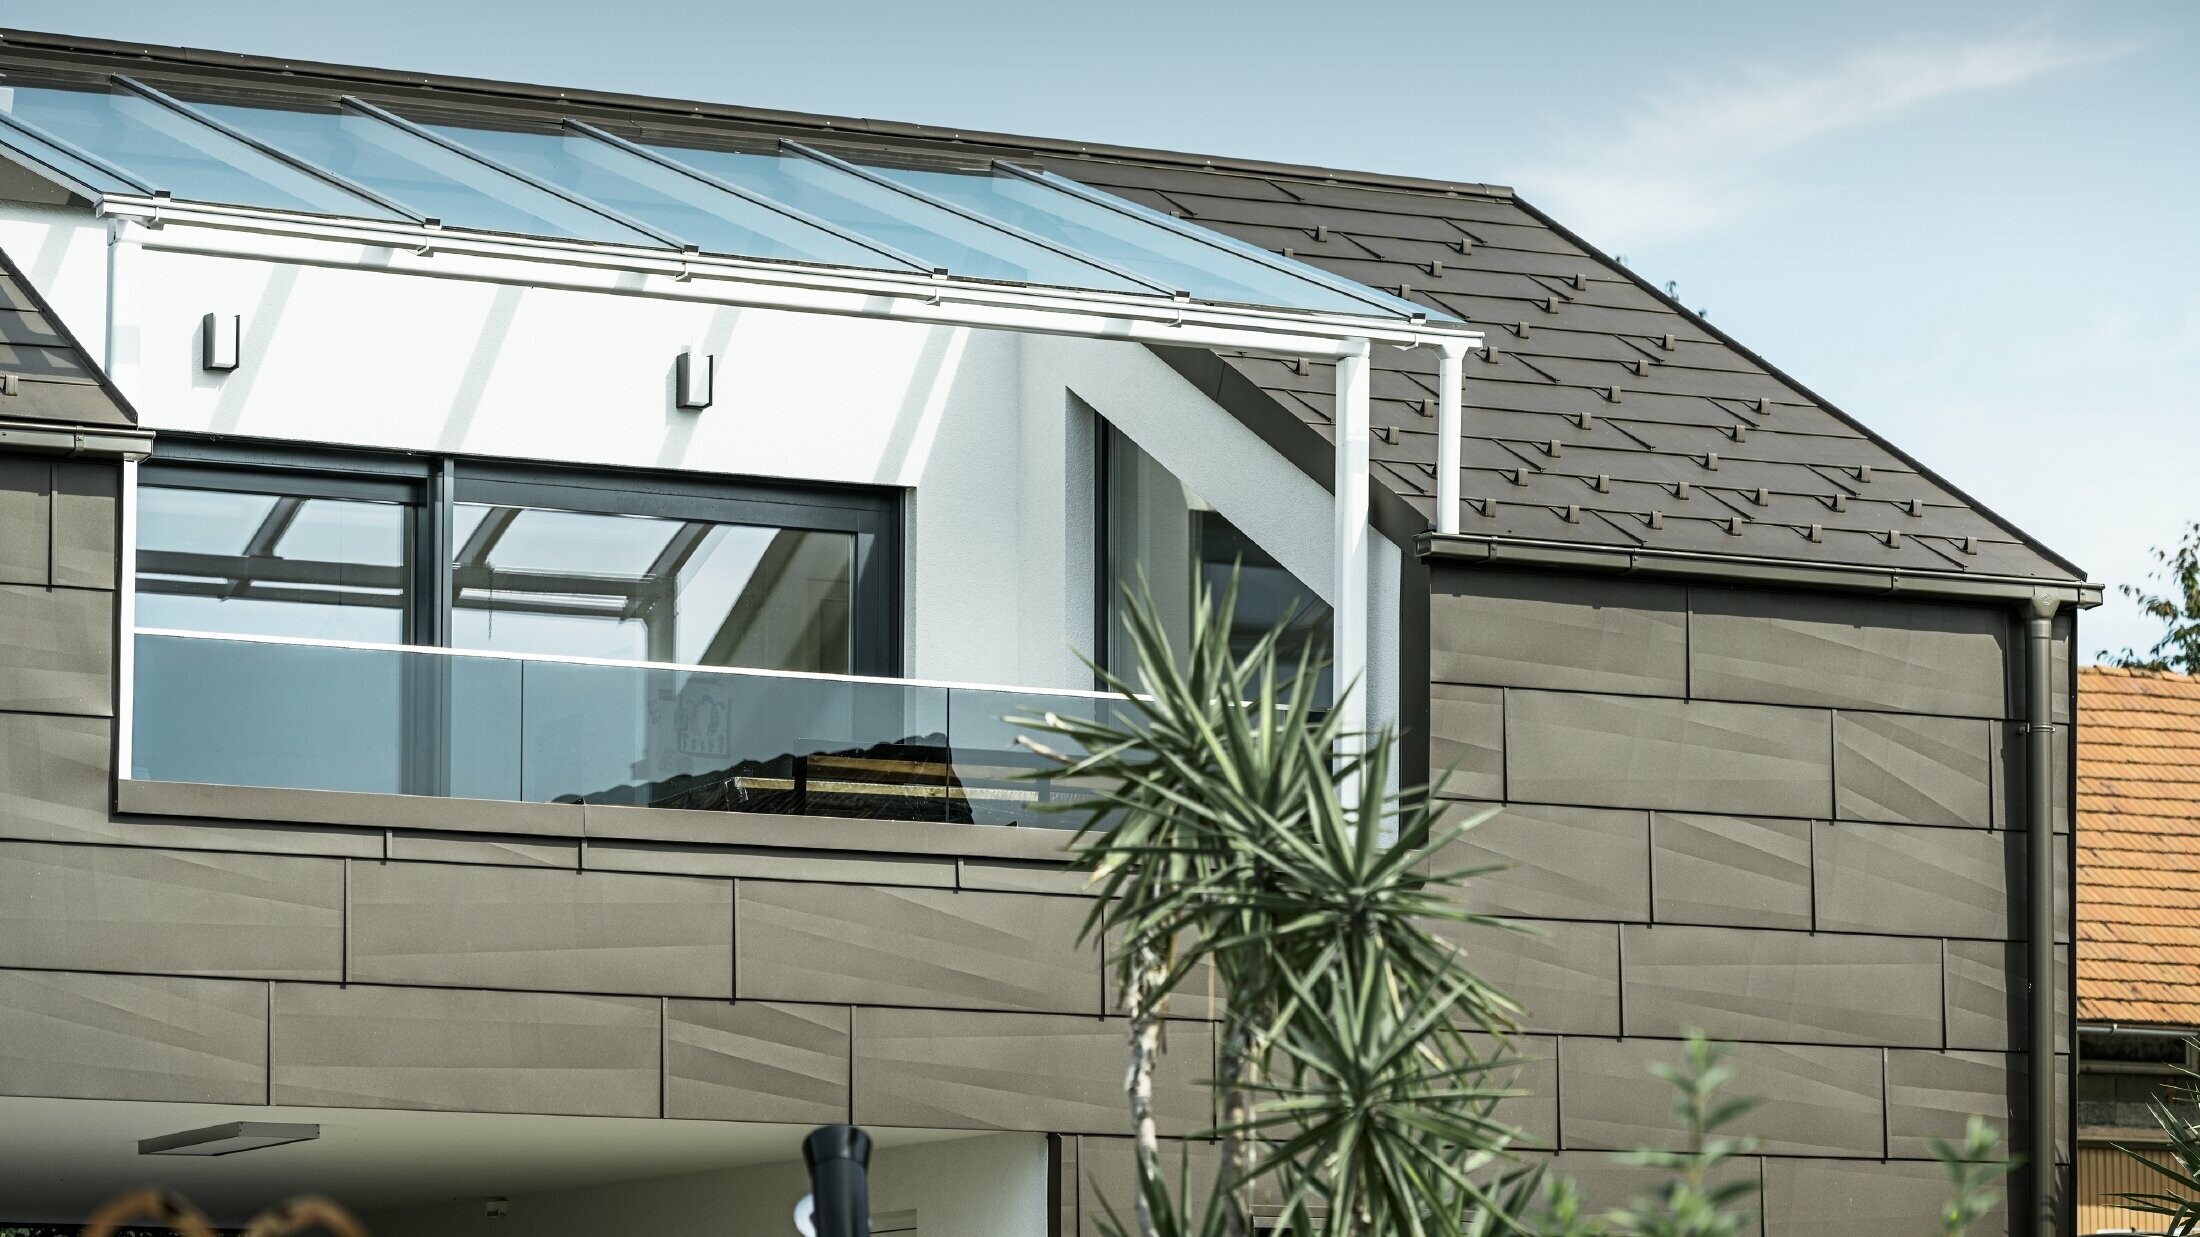 Extension with a roof terrace clad with the PREFA complete system, while the PREFA roof and façade panel FX.12 was used on the roof and façade. In addition, the PREFA box gutter with the PREFA downpipe and the extensive range of accessories in brown are used for roof drainage.